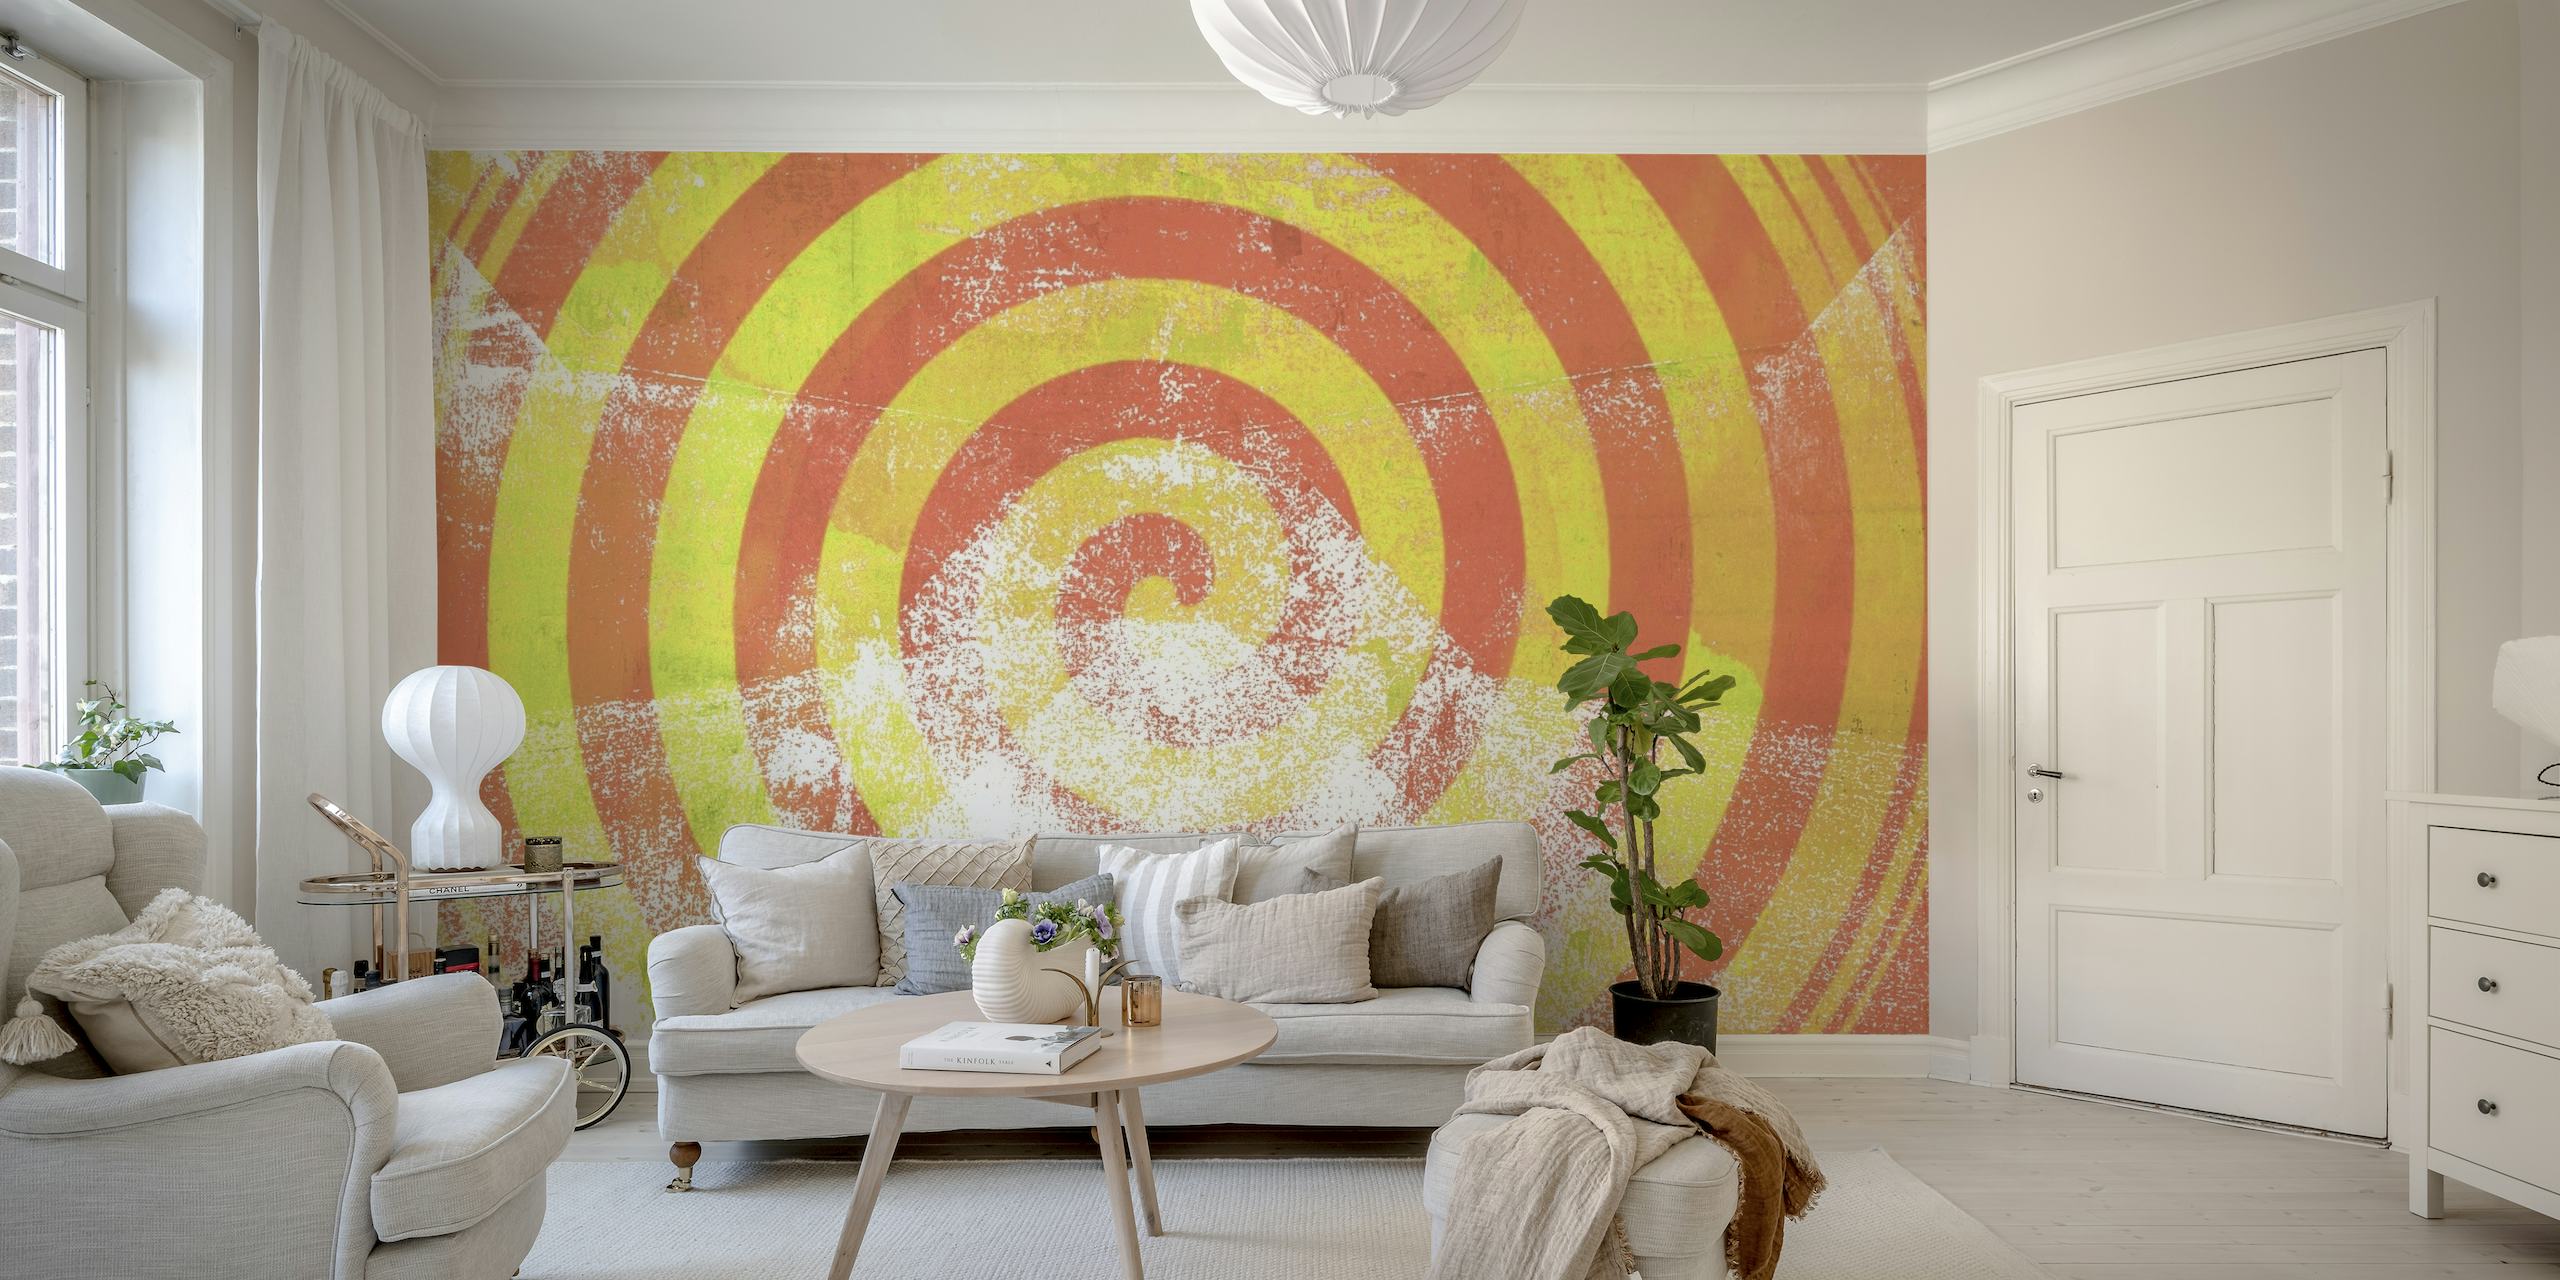 Vintage Grunge style wall mural with concentric circles and textured overlay